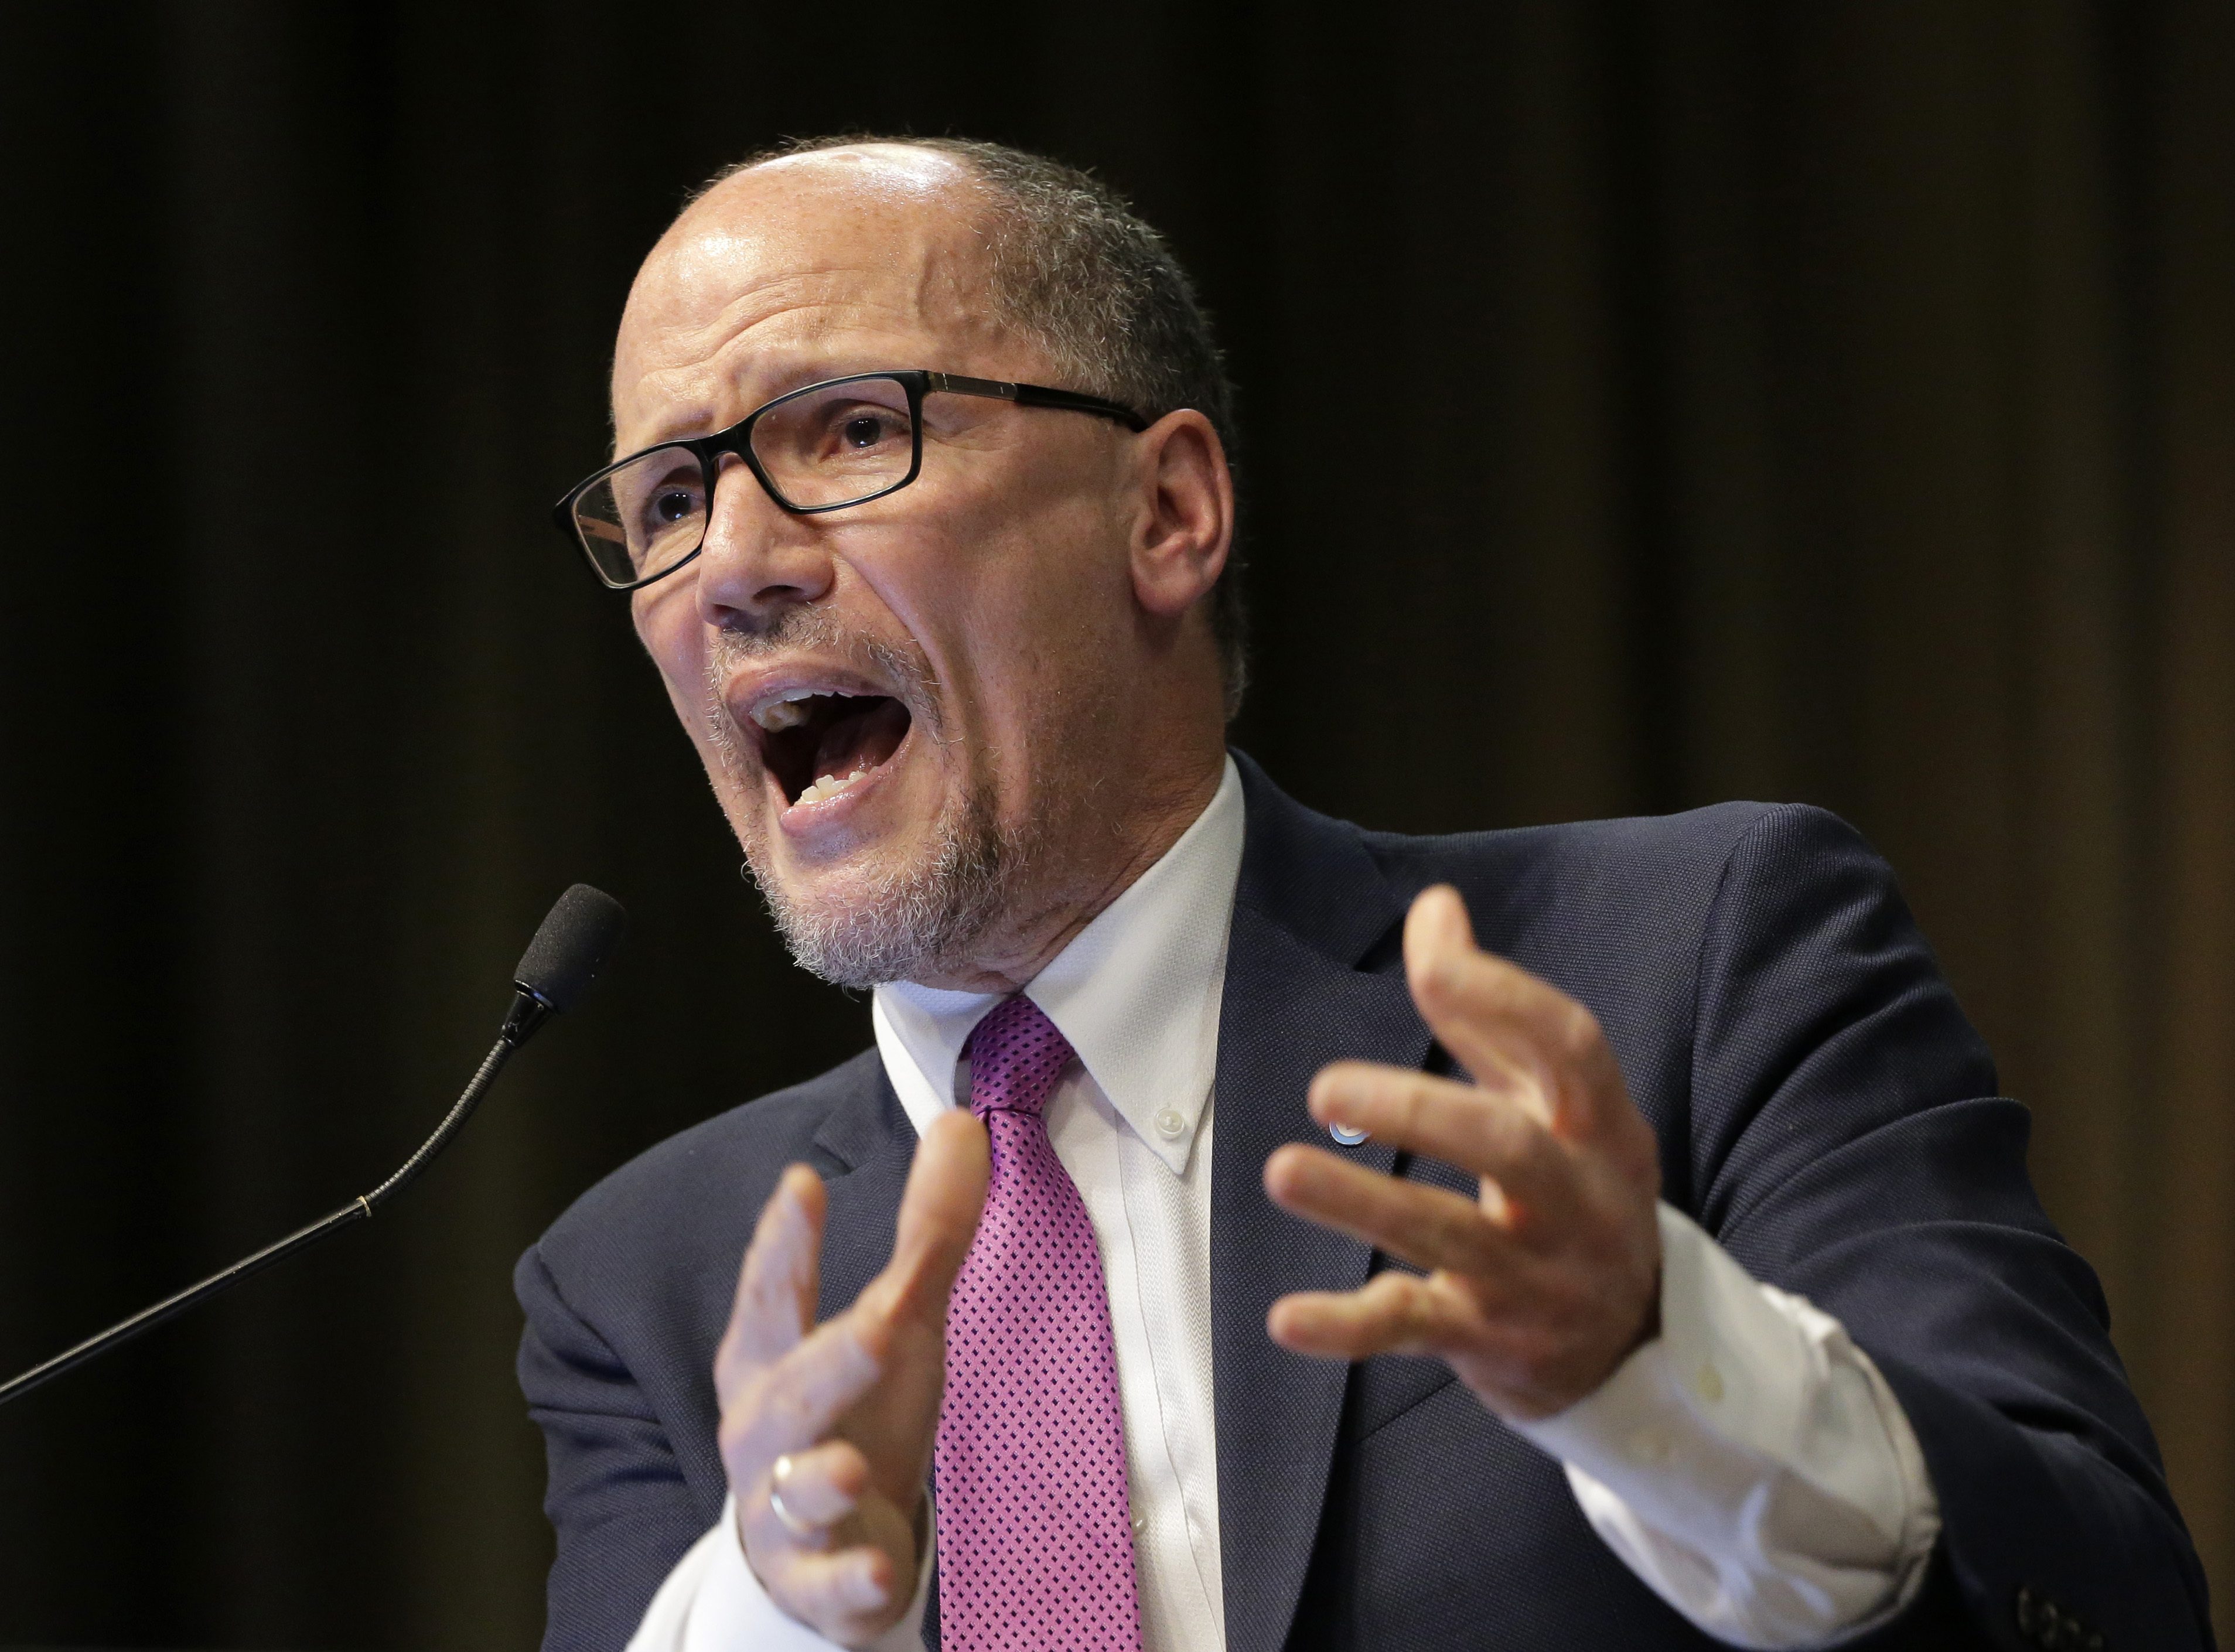 Tom Perez, chairman of the Democratic National Committee, speaks during the National Action Network Convention in New York on April 3, 2019. The Democratic National Committee is upping the ante for its second round of presidential primary debates, doubling the polling and grassroots fundraising requirements from its initial summer debates. (Seth Wenig–AP Tom Perez, chairman of the Democratic National Committee, speaks during the National Action Network Convention in New York on April 3, 2019. The Democratic National Committee is upping the ante for its second round of presidential primary debates, doubling the polling and grassroots fundraising requirements from its initial summer debates.)